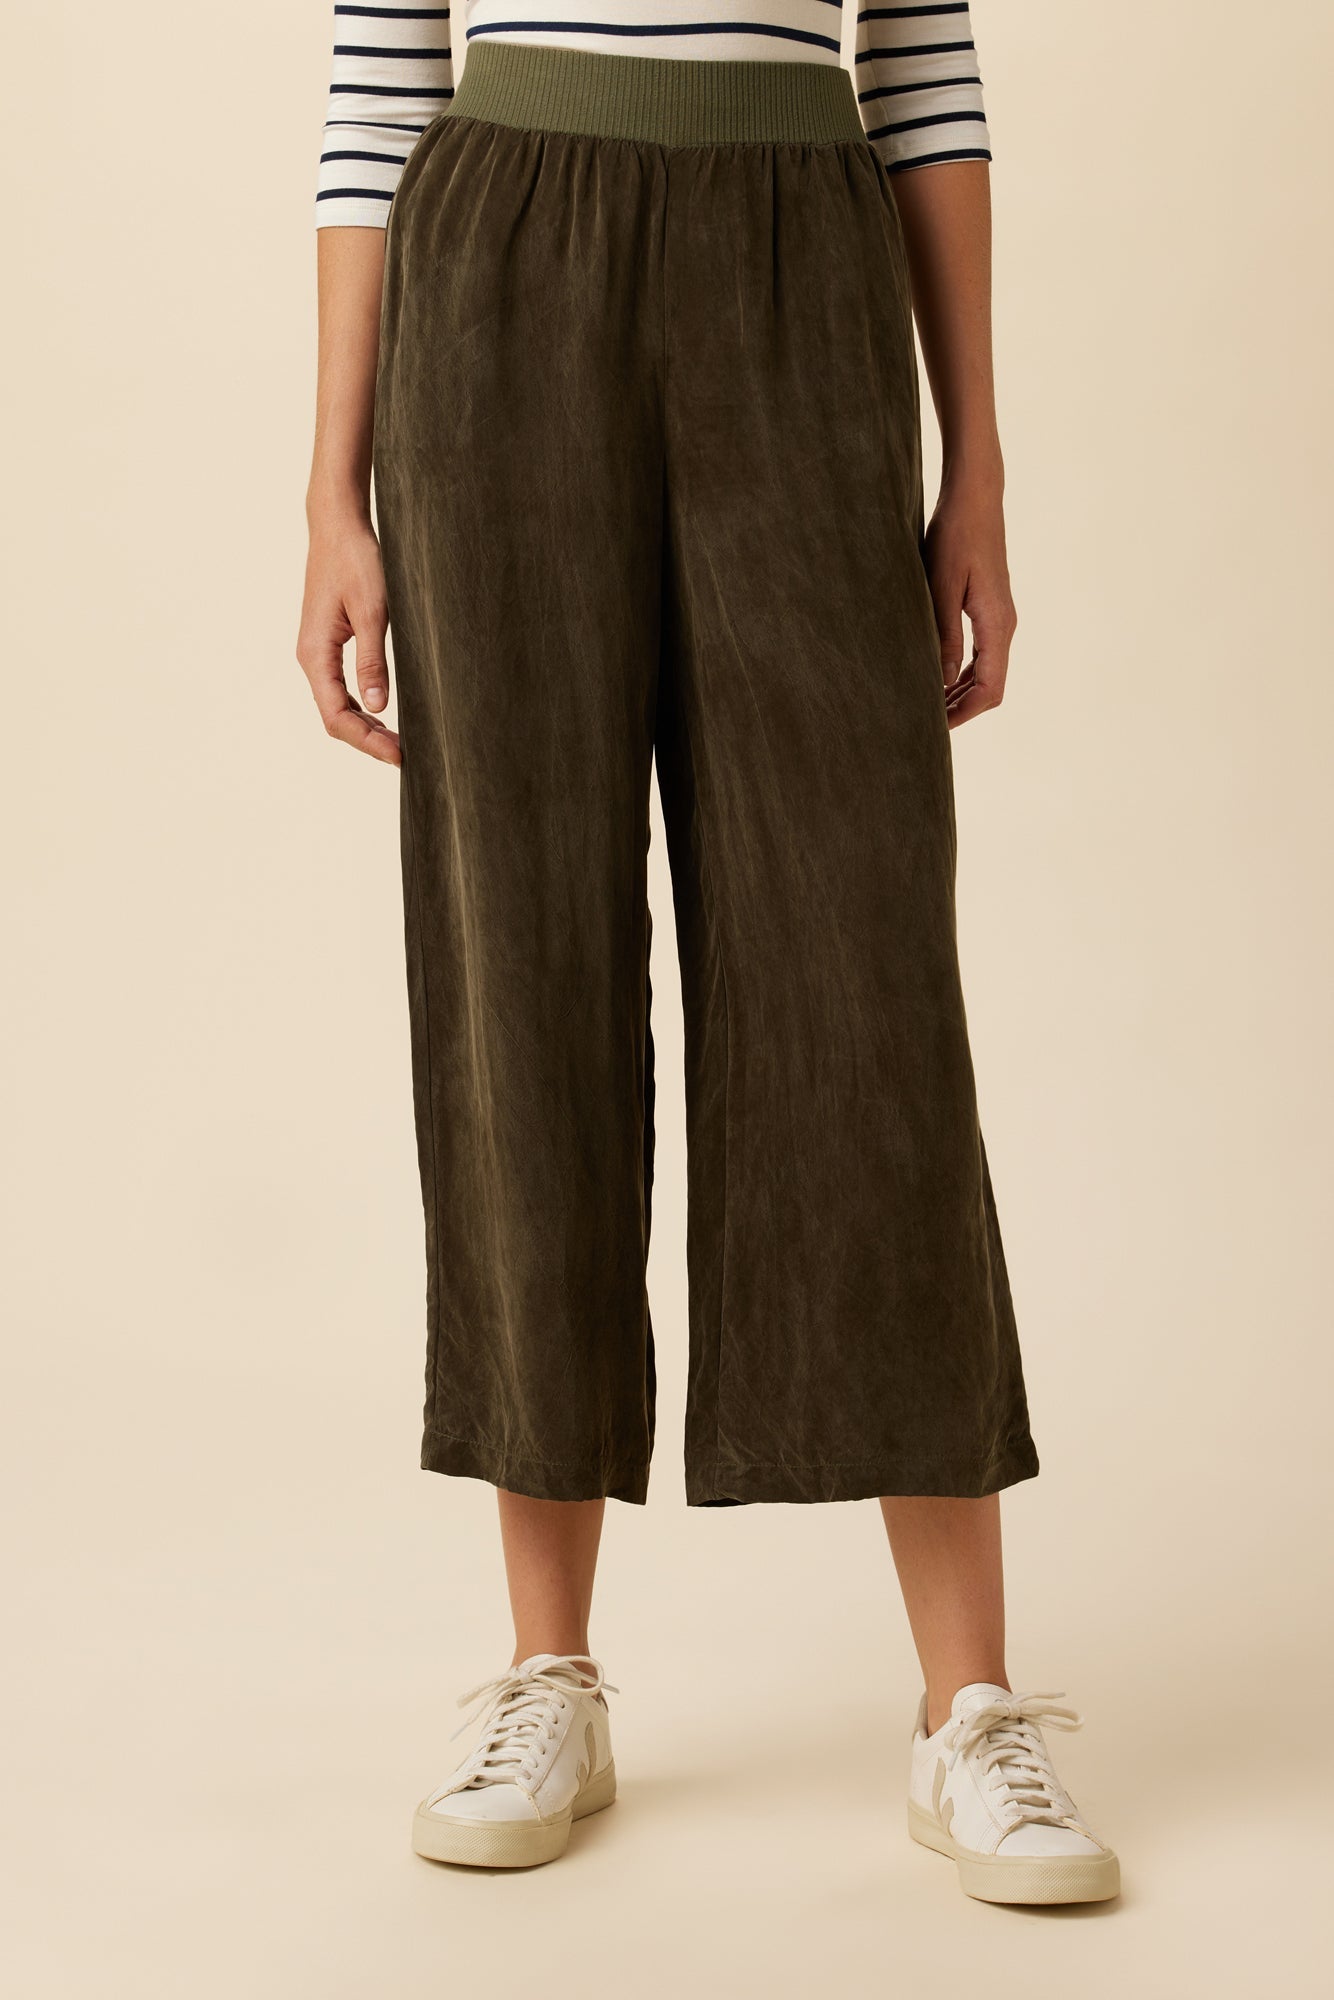 Salice Mixed Cupro Pants - Olive - ReAmour